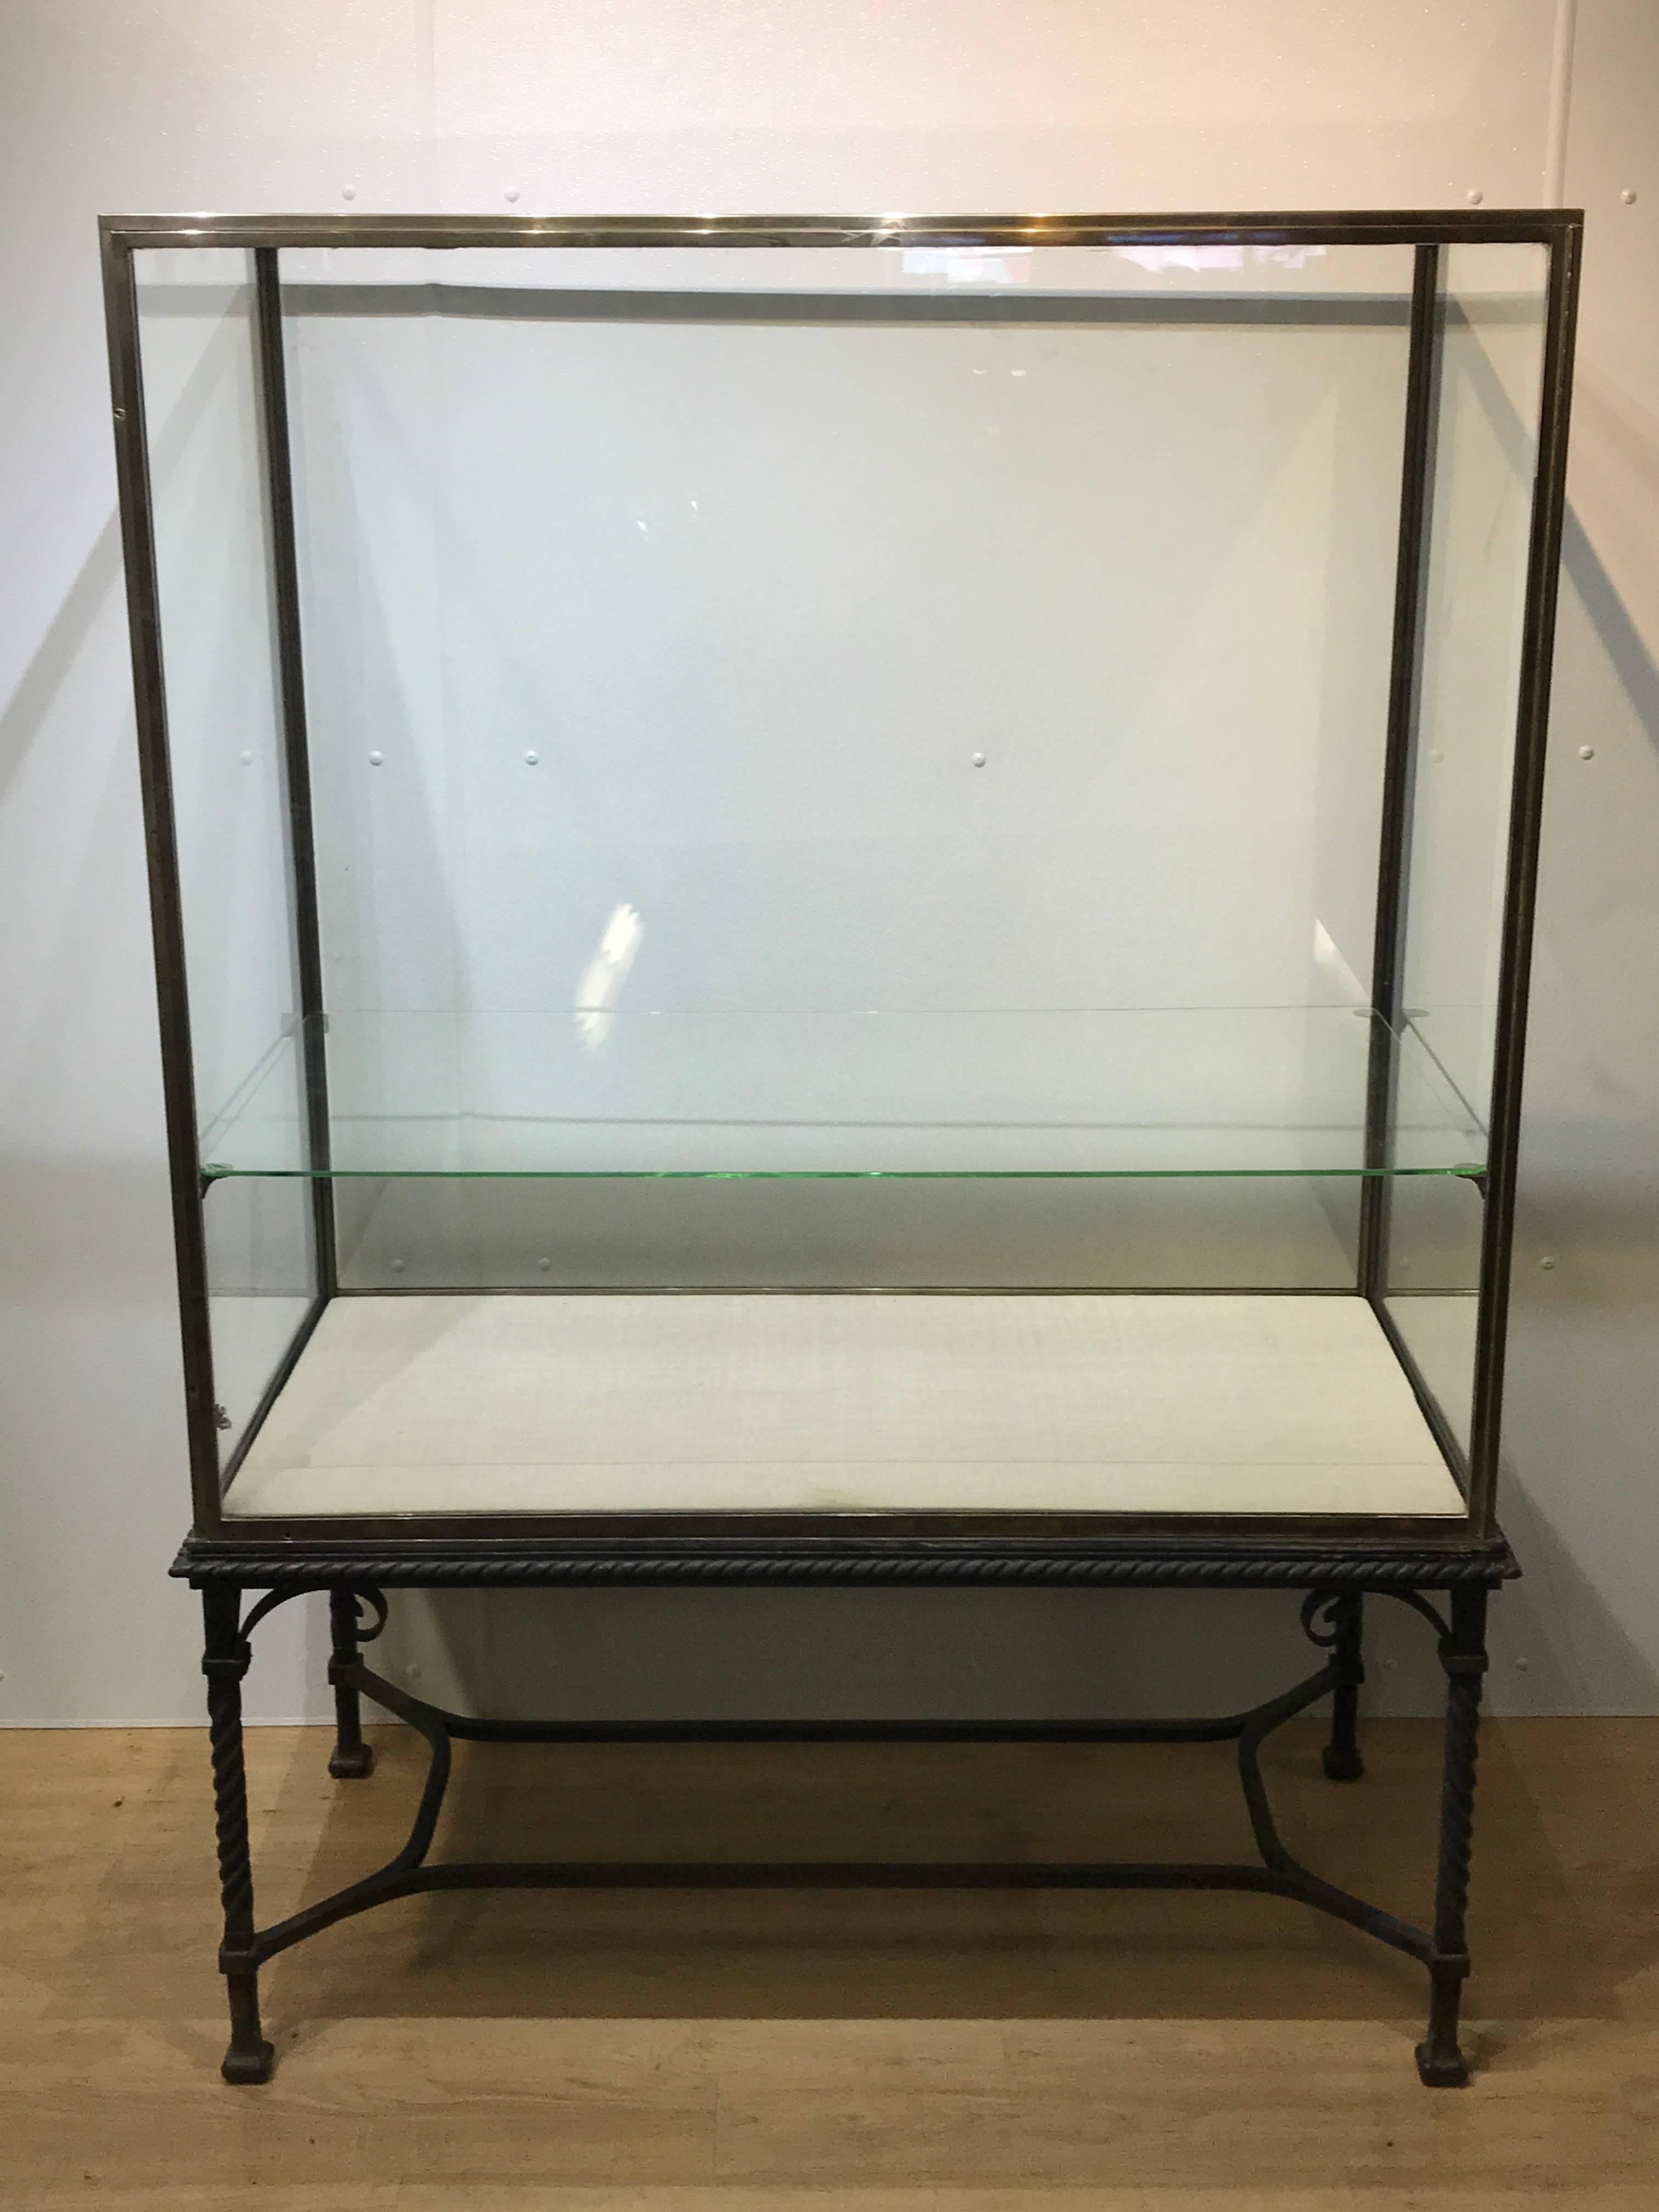 Pair of Belle Époque museum display cases, each one of large brass-mounted glass paneled cabinets, on a rope twisted forged iron base. The upper case measures 49" x 48" x 25; the interior of the glass case is 49" x 24.5". The